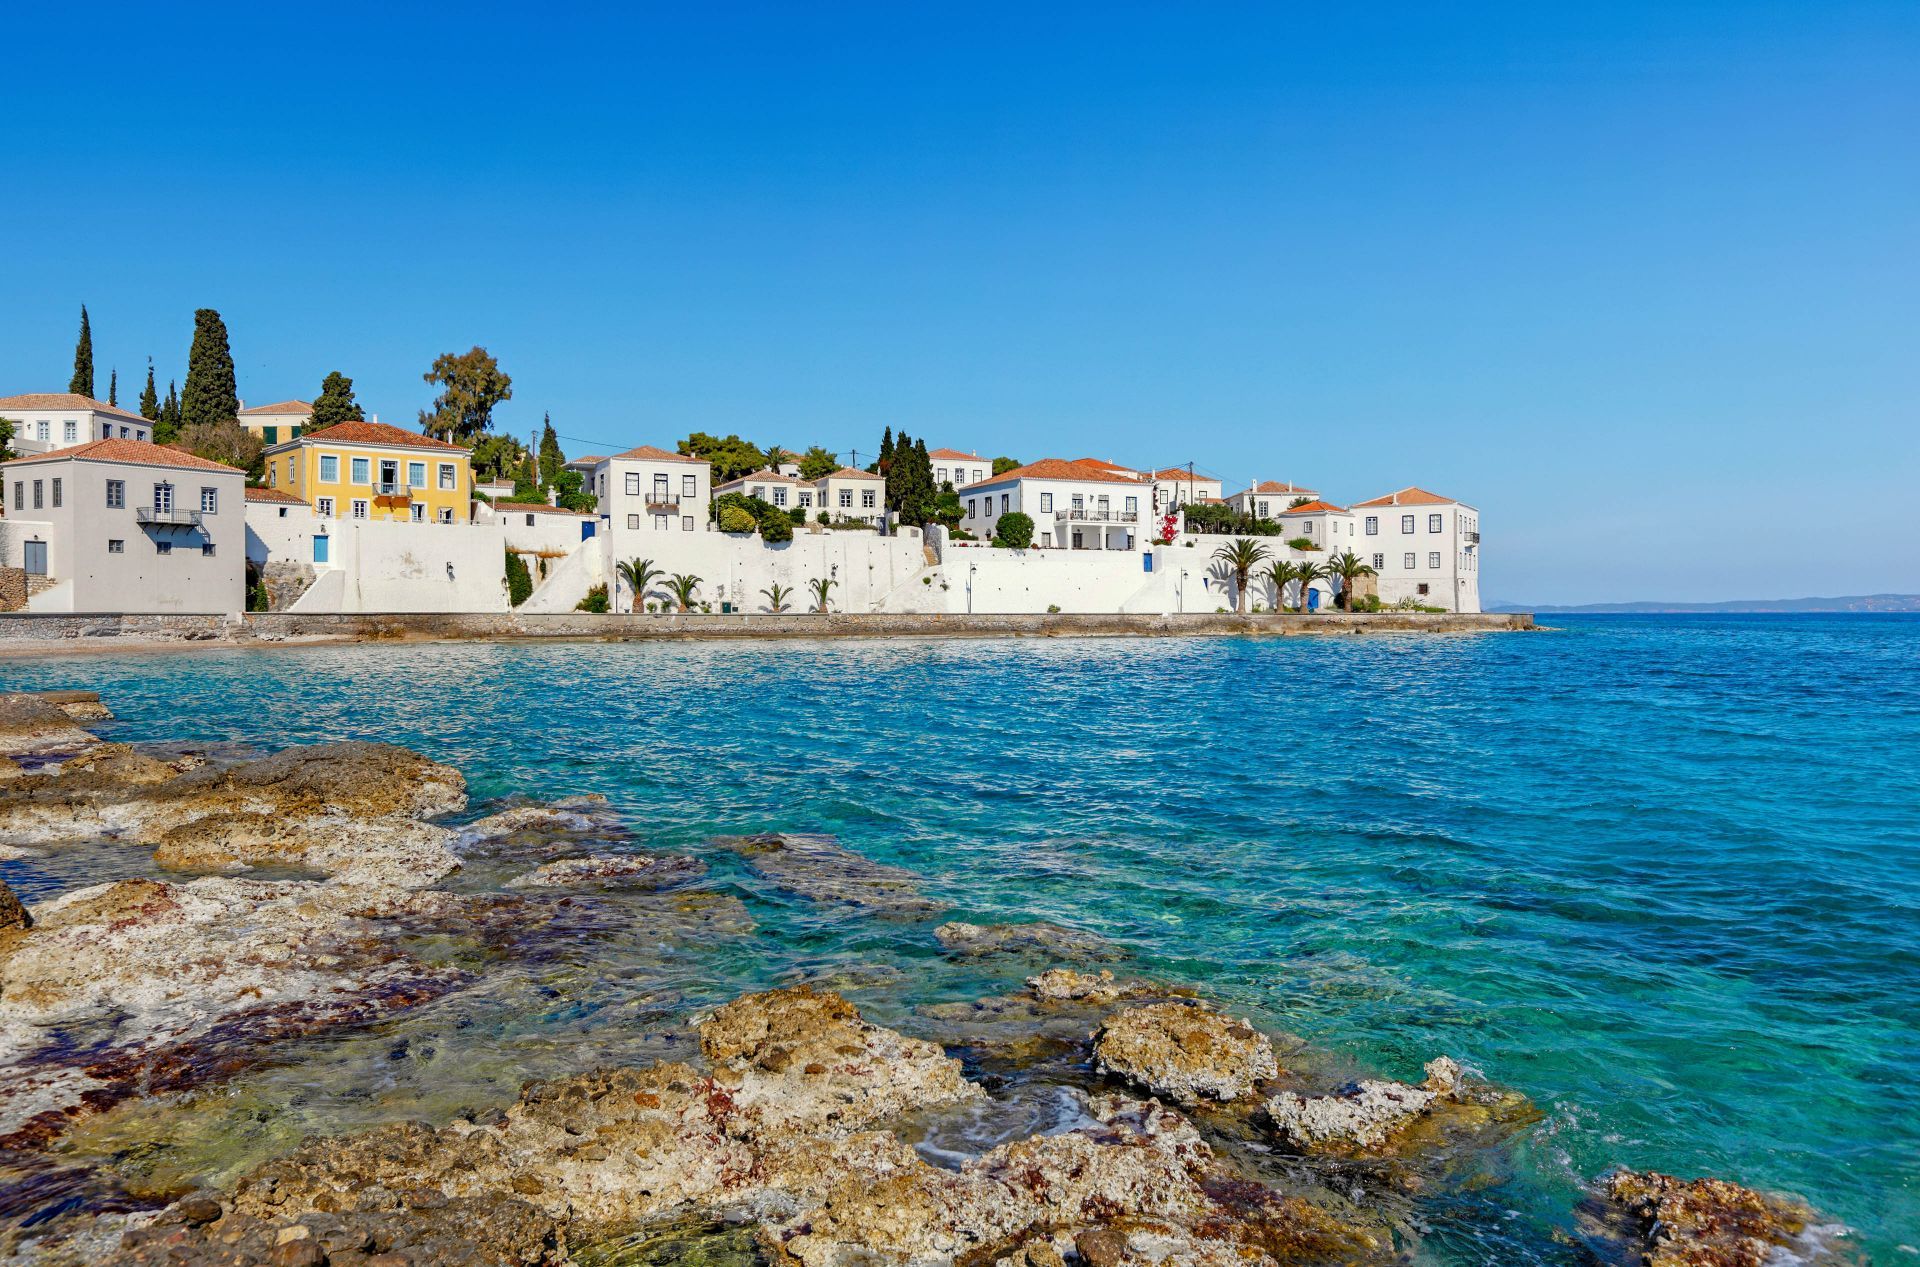 Saronic islands: The town of Spetses island